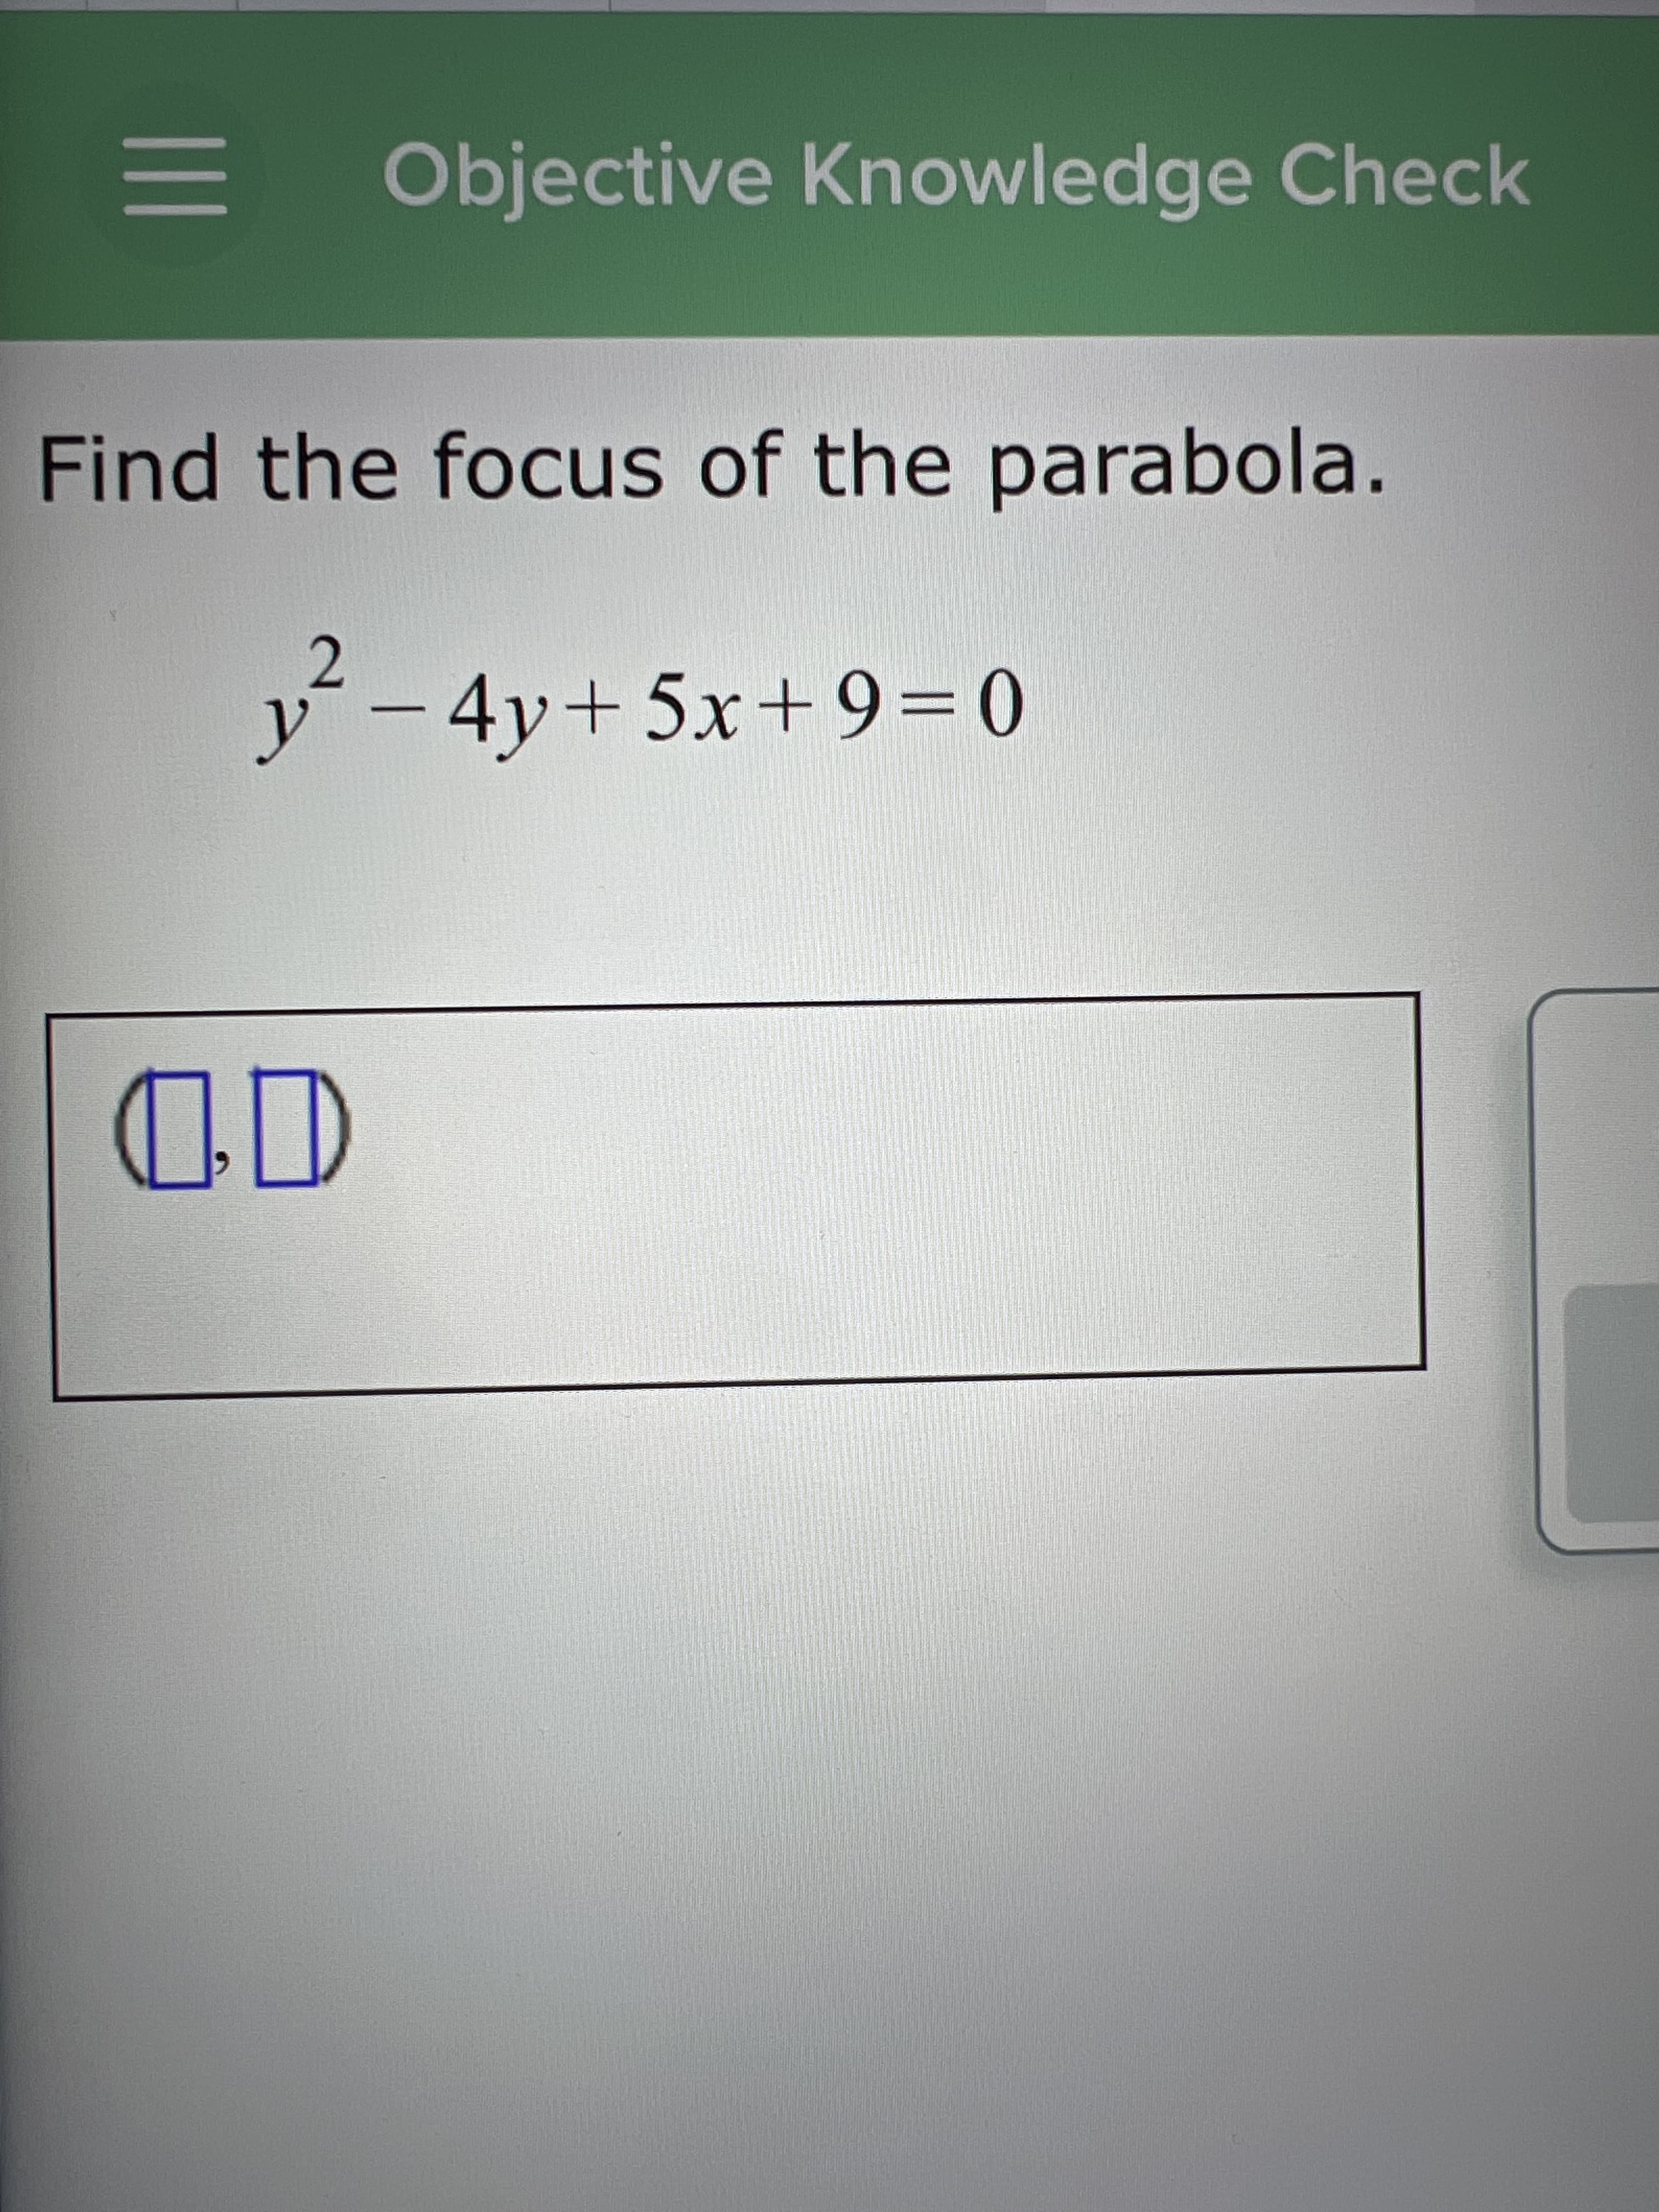 Objective Knowledge Check
Find the focus of the parabola.
2.
y´ - 4y+5x+9=0
1D
